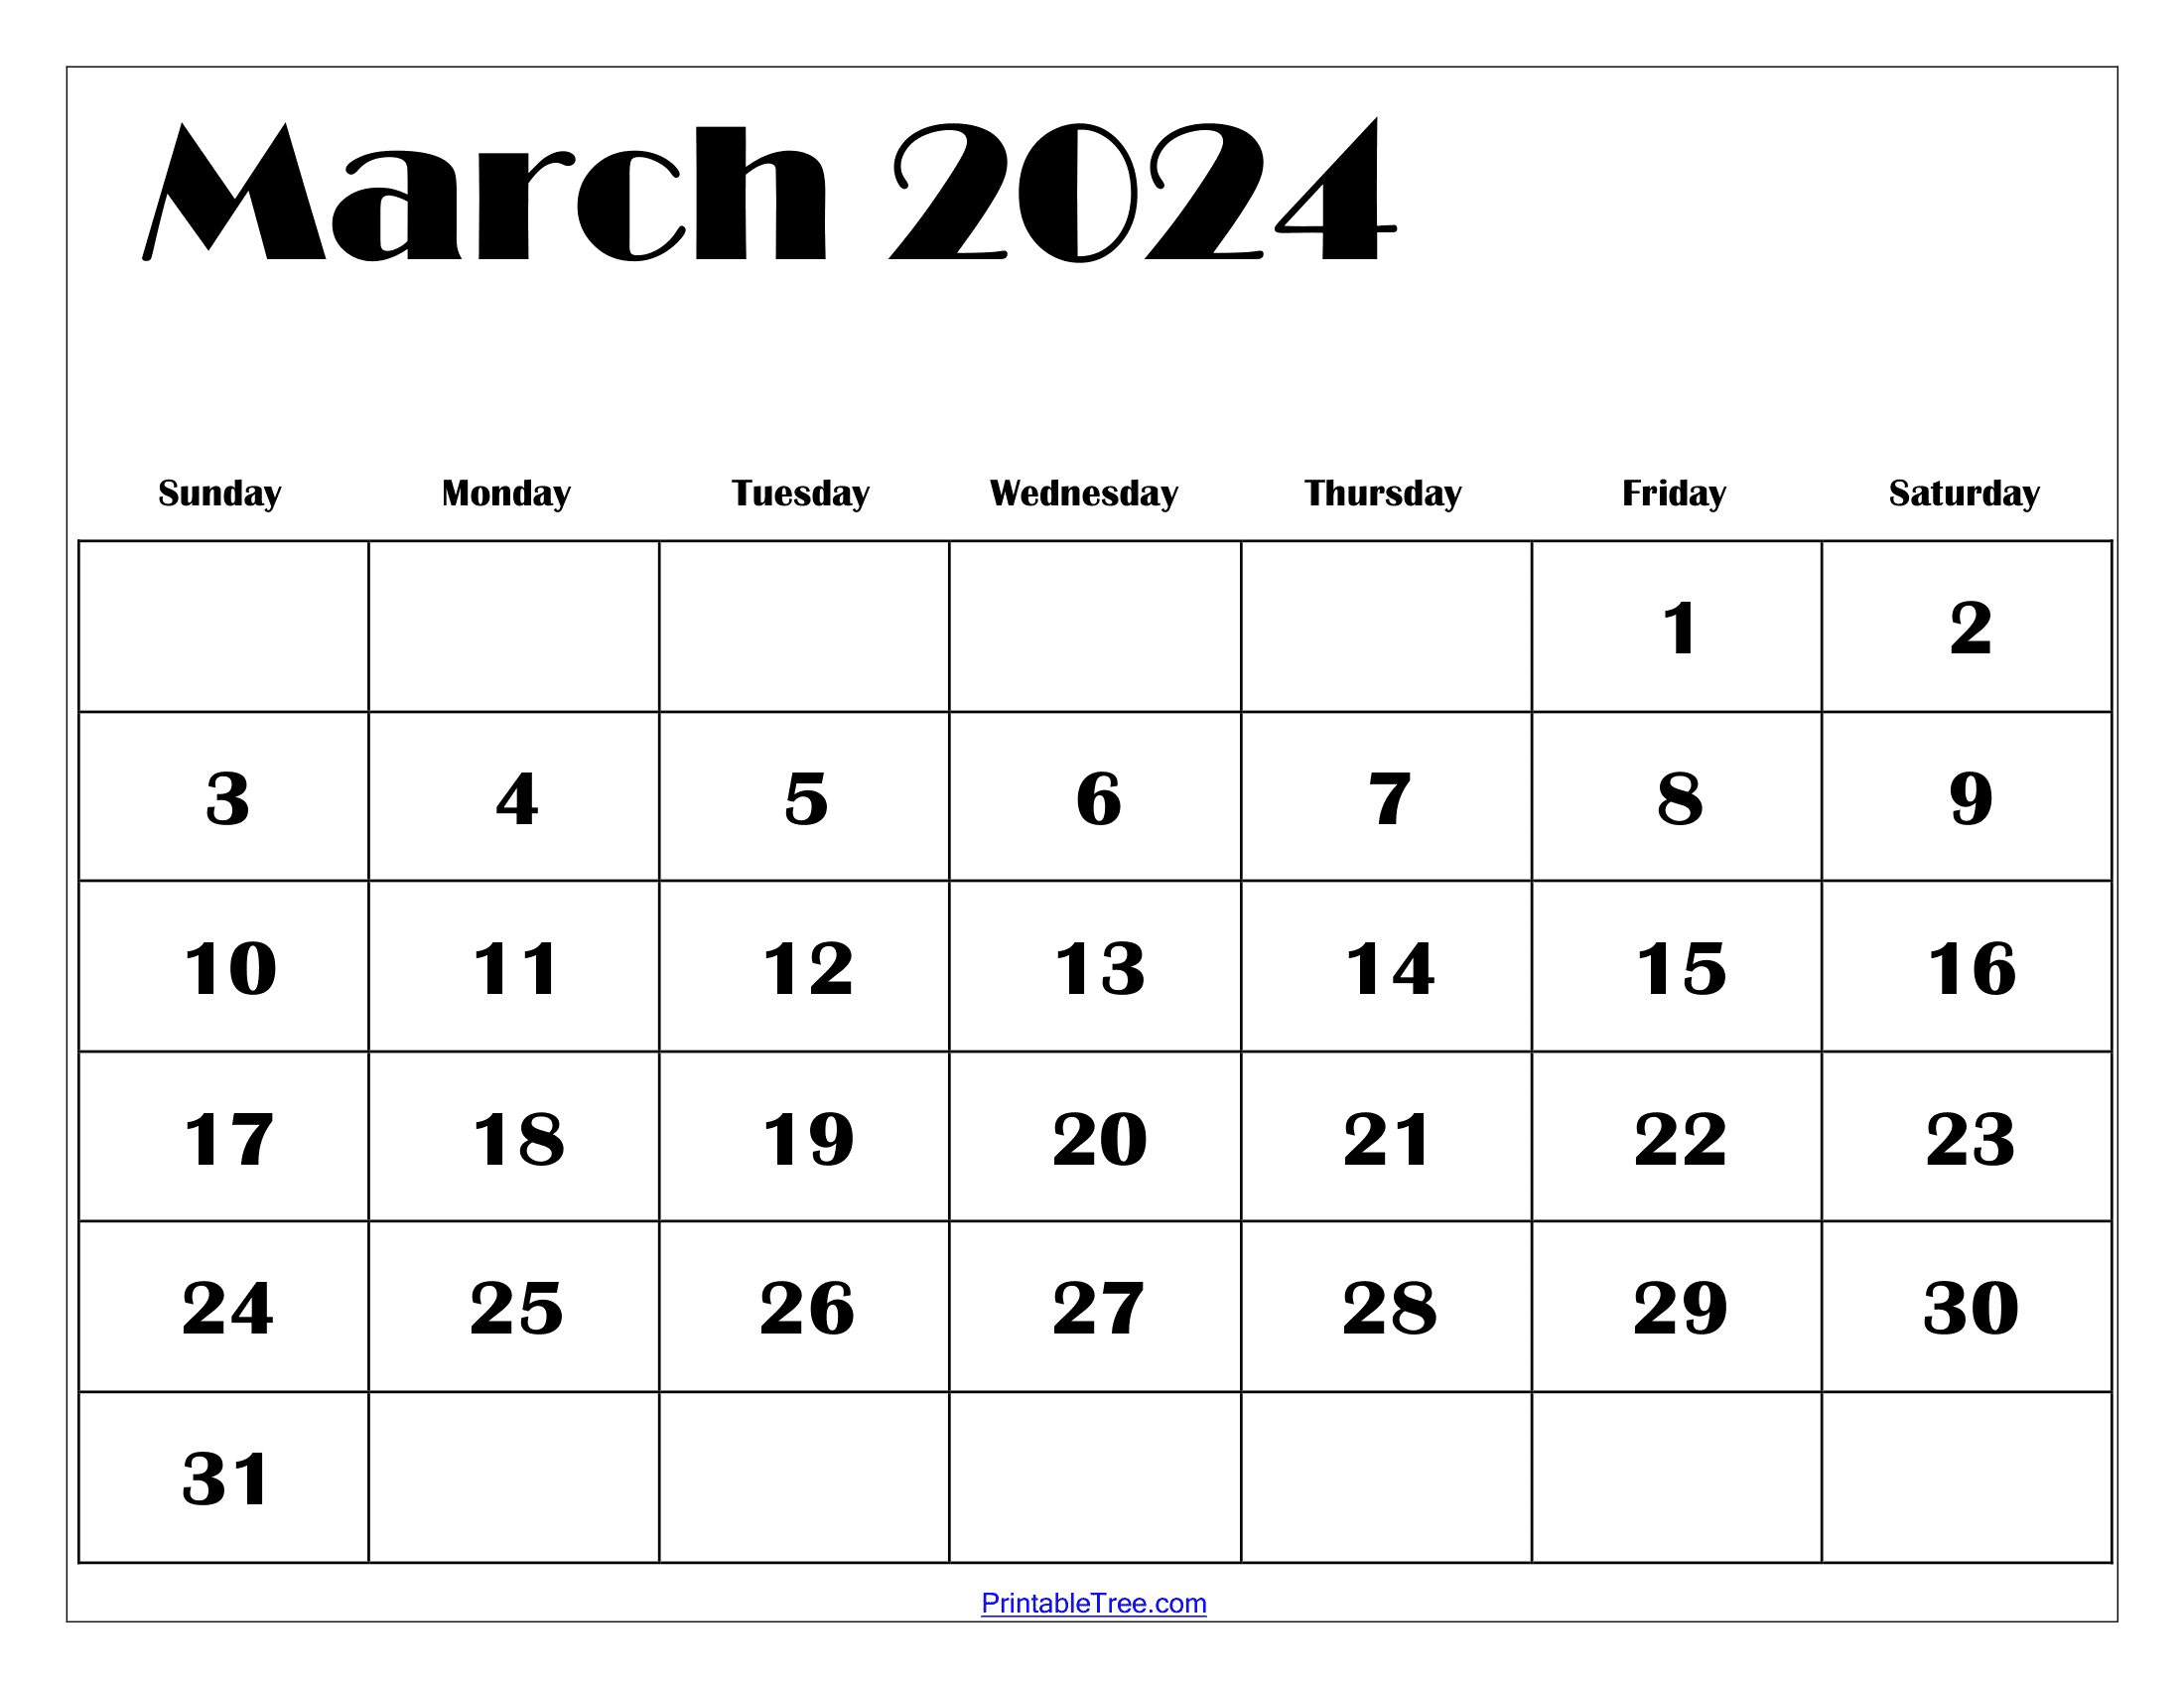 March 2024 Calendar Printable Pdf With Holidays Template Free for March 2024 Calendar Free Printable